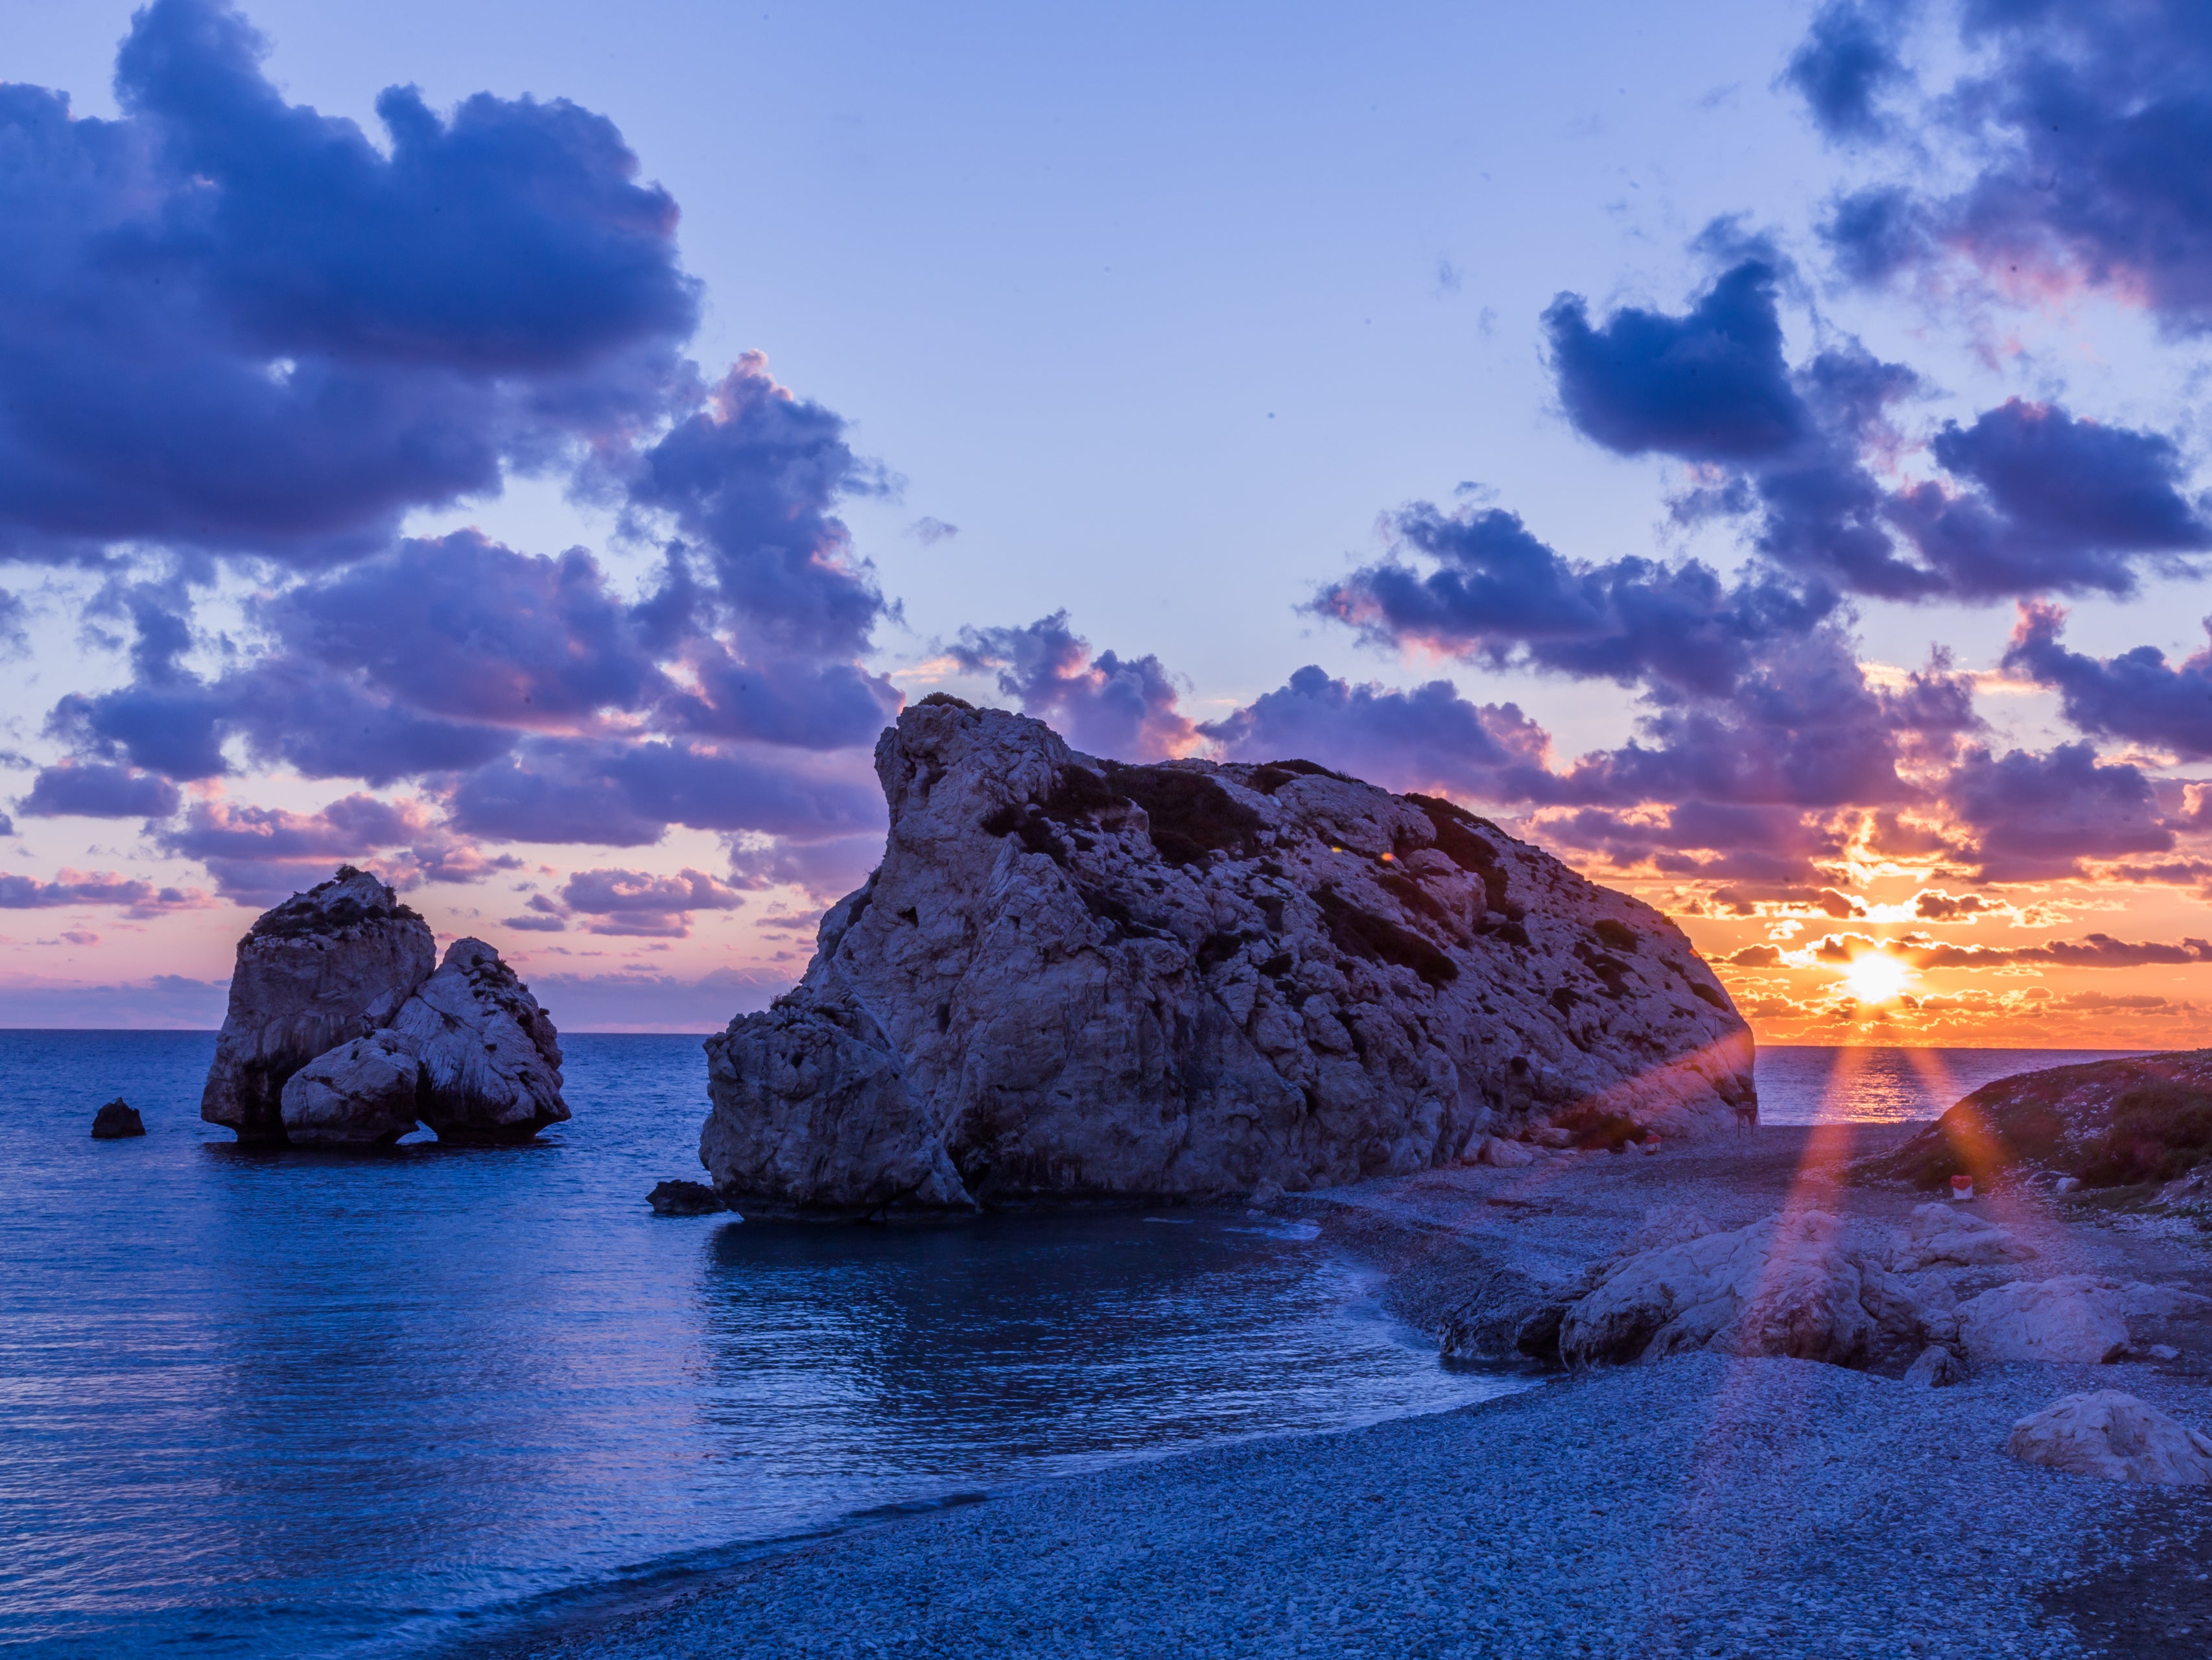 Paphos, Cyprus, is perfect for a luxury trip at short notice that won’t break the bank